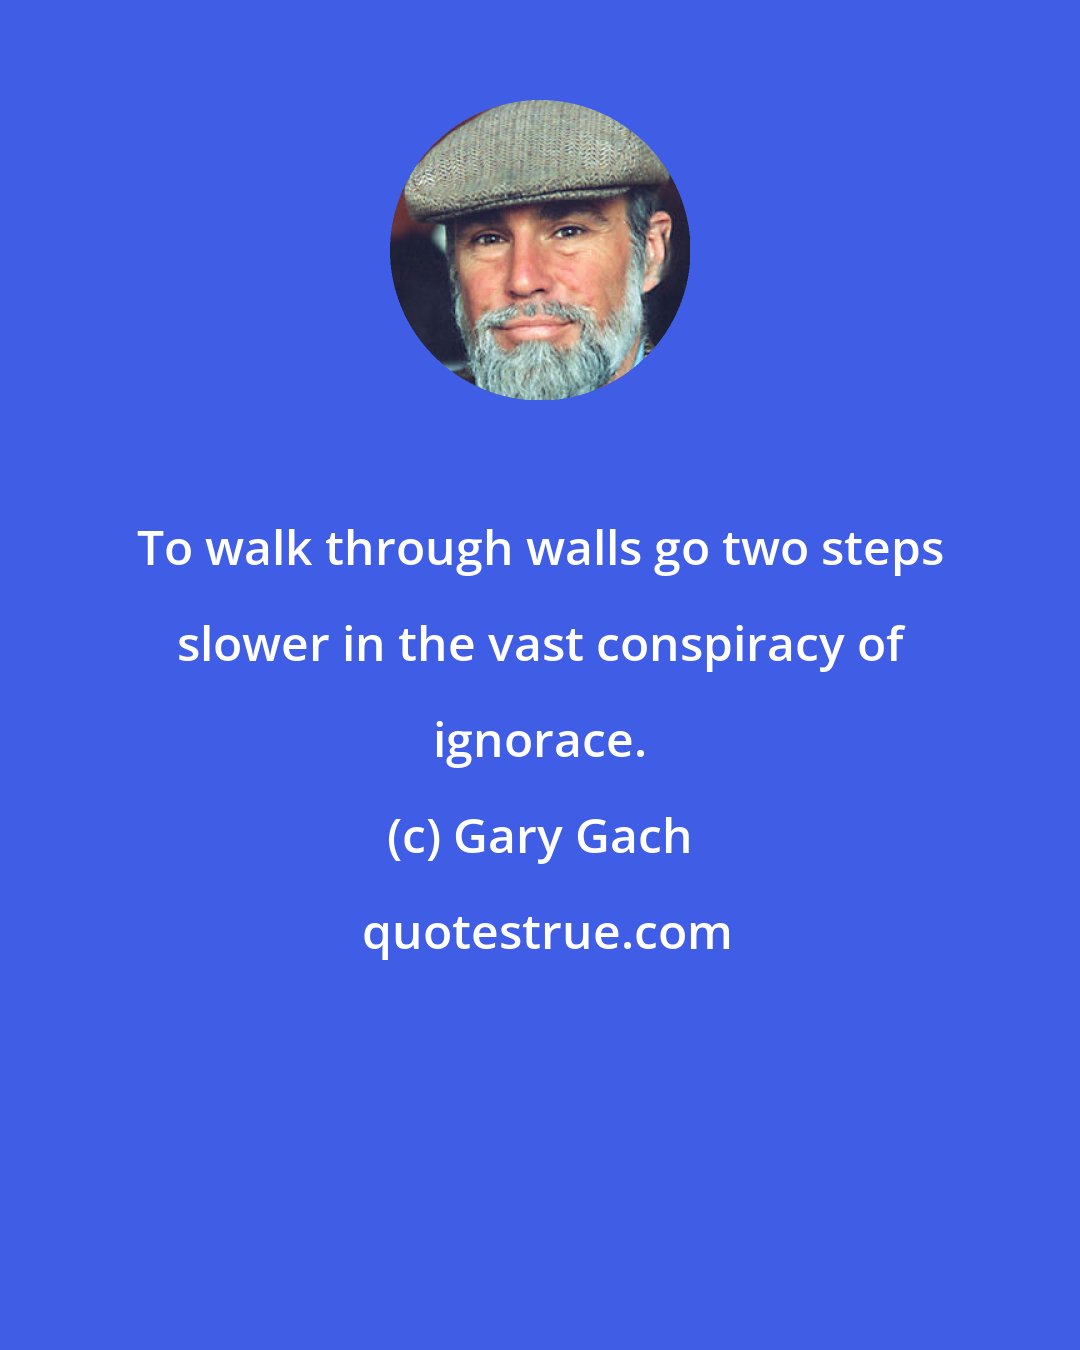 Gary Gach: To walk through walls go two steps slower in the vast conspiracy of ignorace.